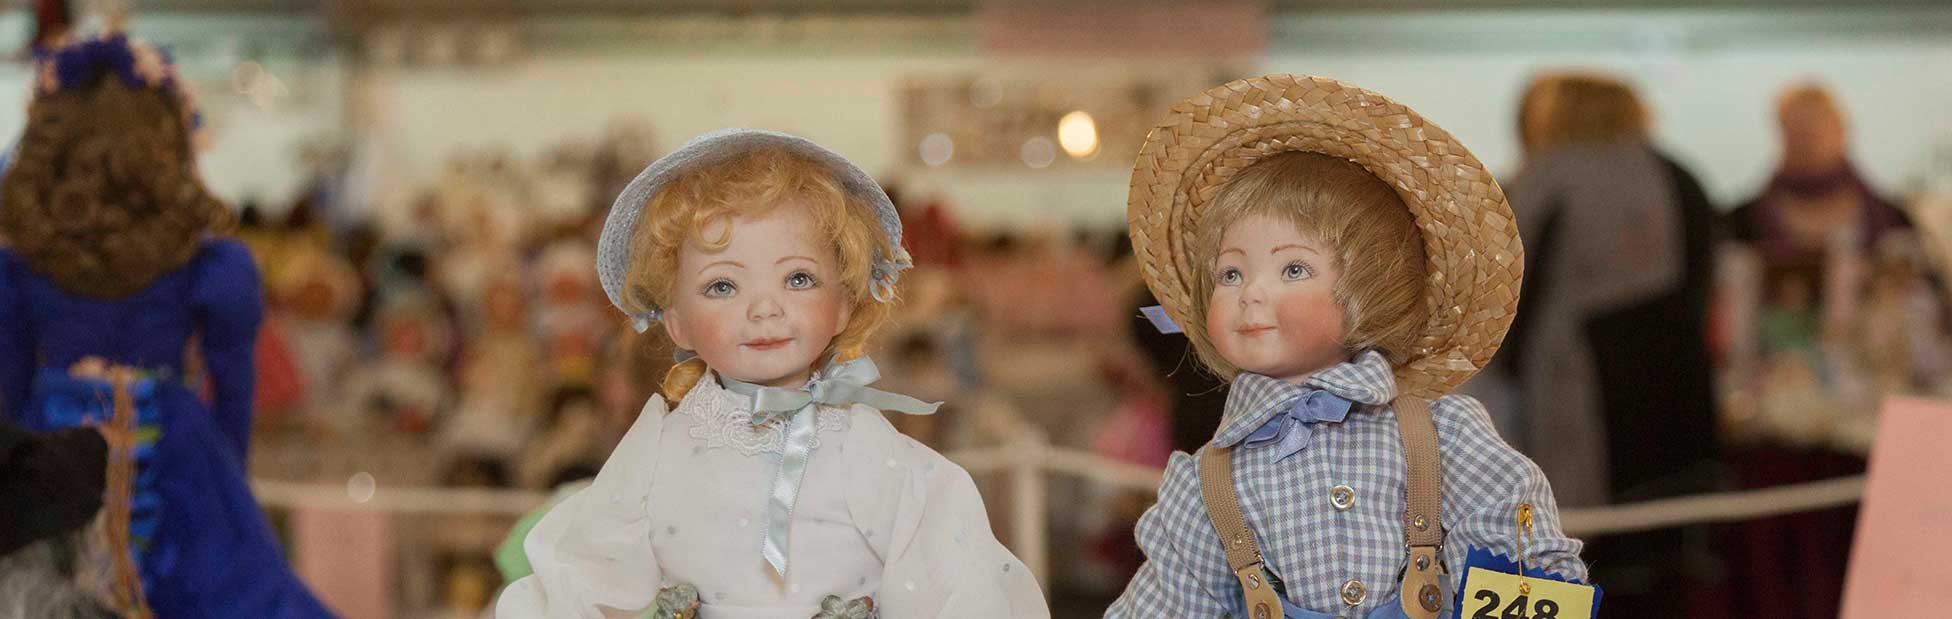 Male and female dolls on display, both with blue prize ribbons